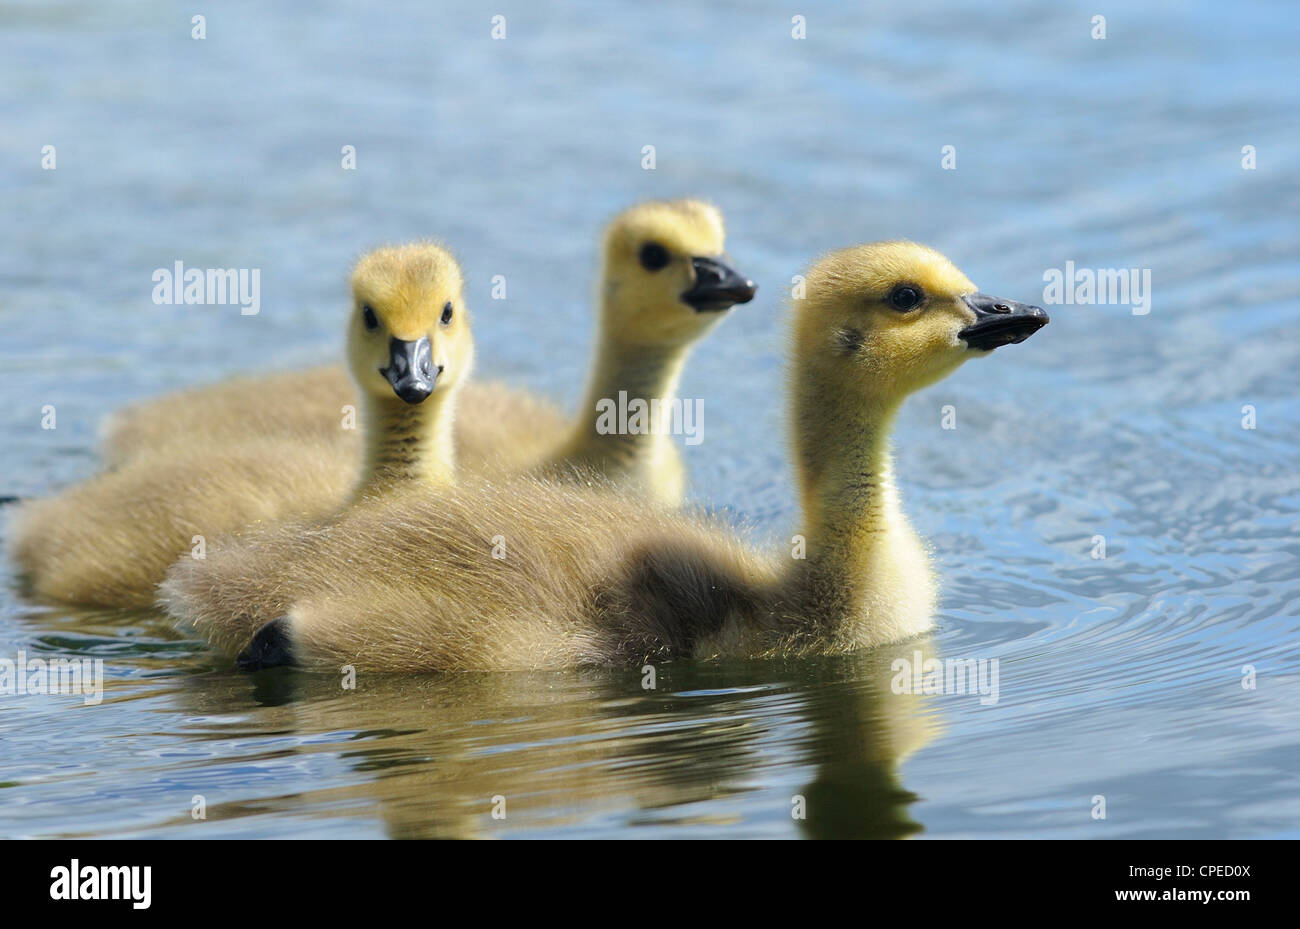 Canada goose baby chicks swimming on a lake still in their fluffy yellow down. Stock Photo